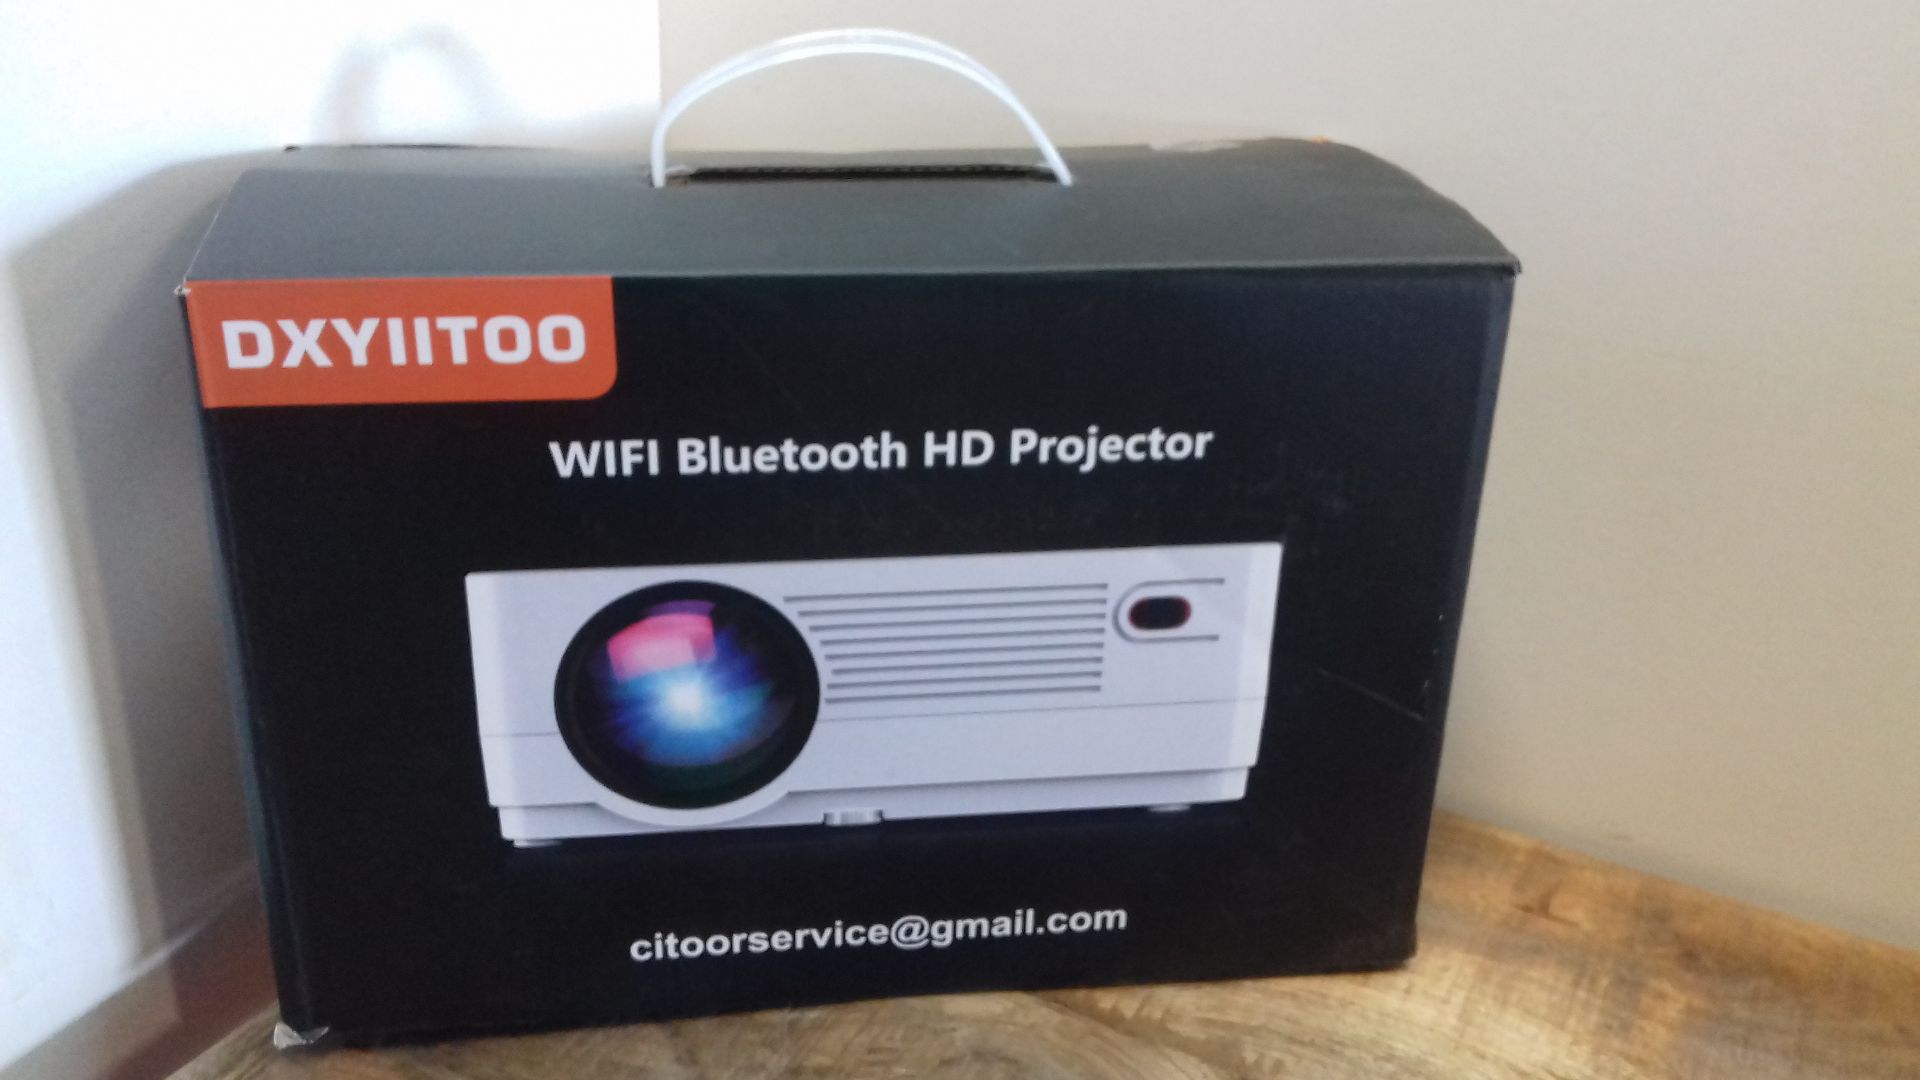 RRP £196.77 Native 1080P Projector with WiFi and Two-Way Bluetooth - Image 2 of 2